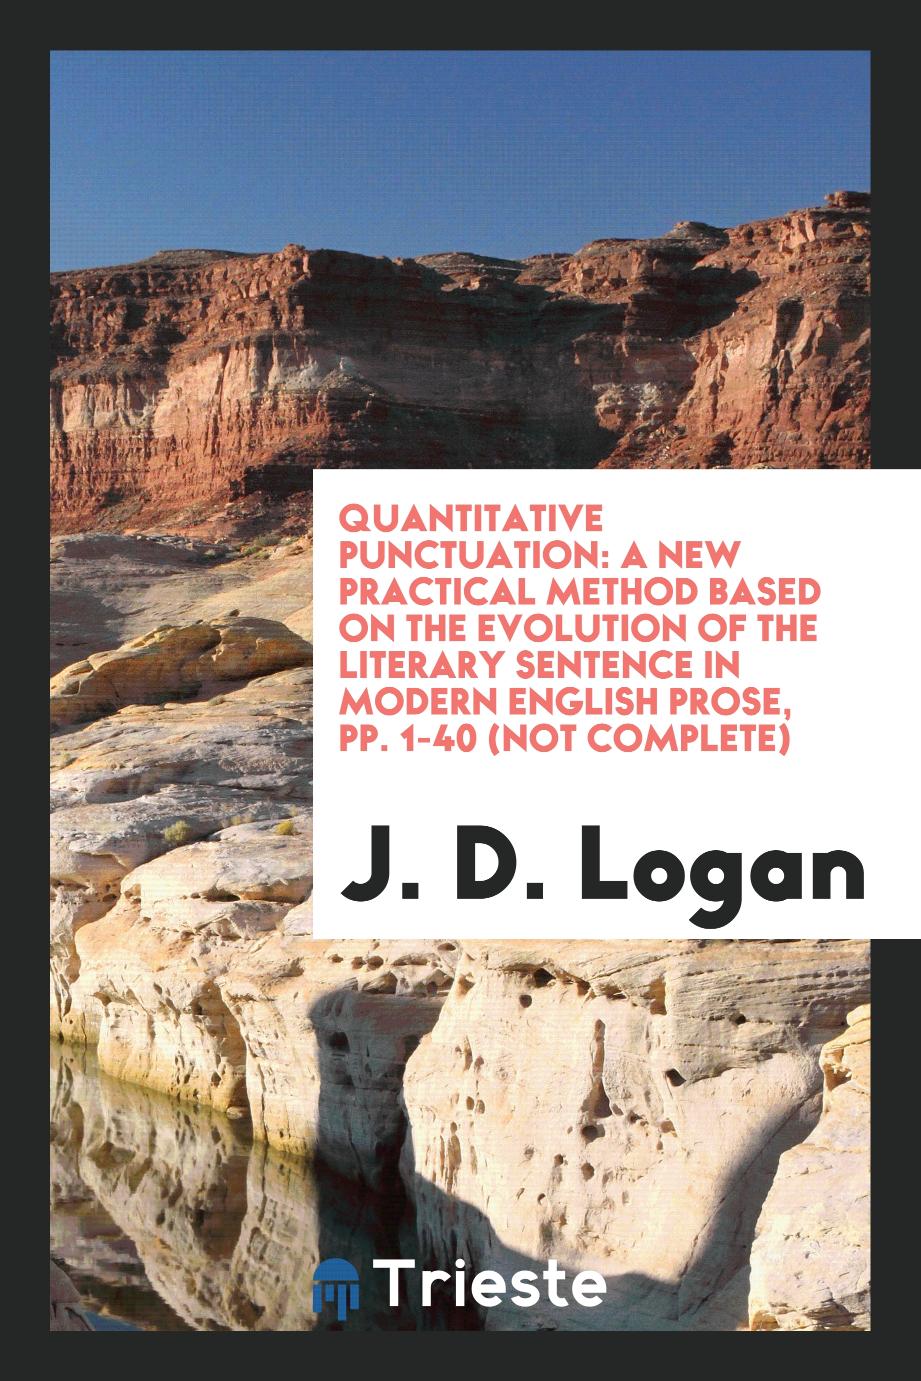 Quantitative Punctuation: A New Practical Method Based on the Evolution of the Literary Sentence in Modern English prose, pp. 1-40 (not complete)